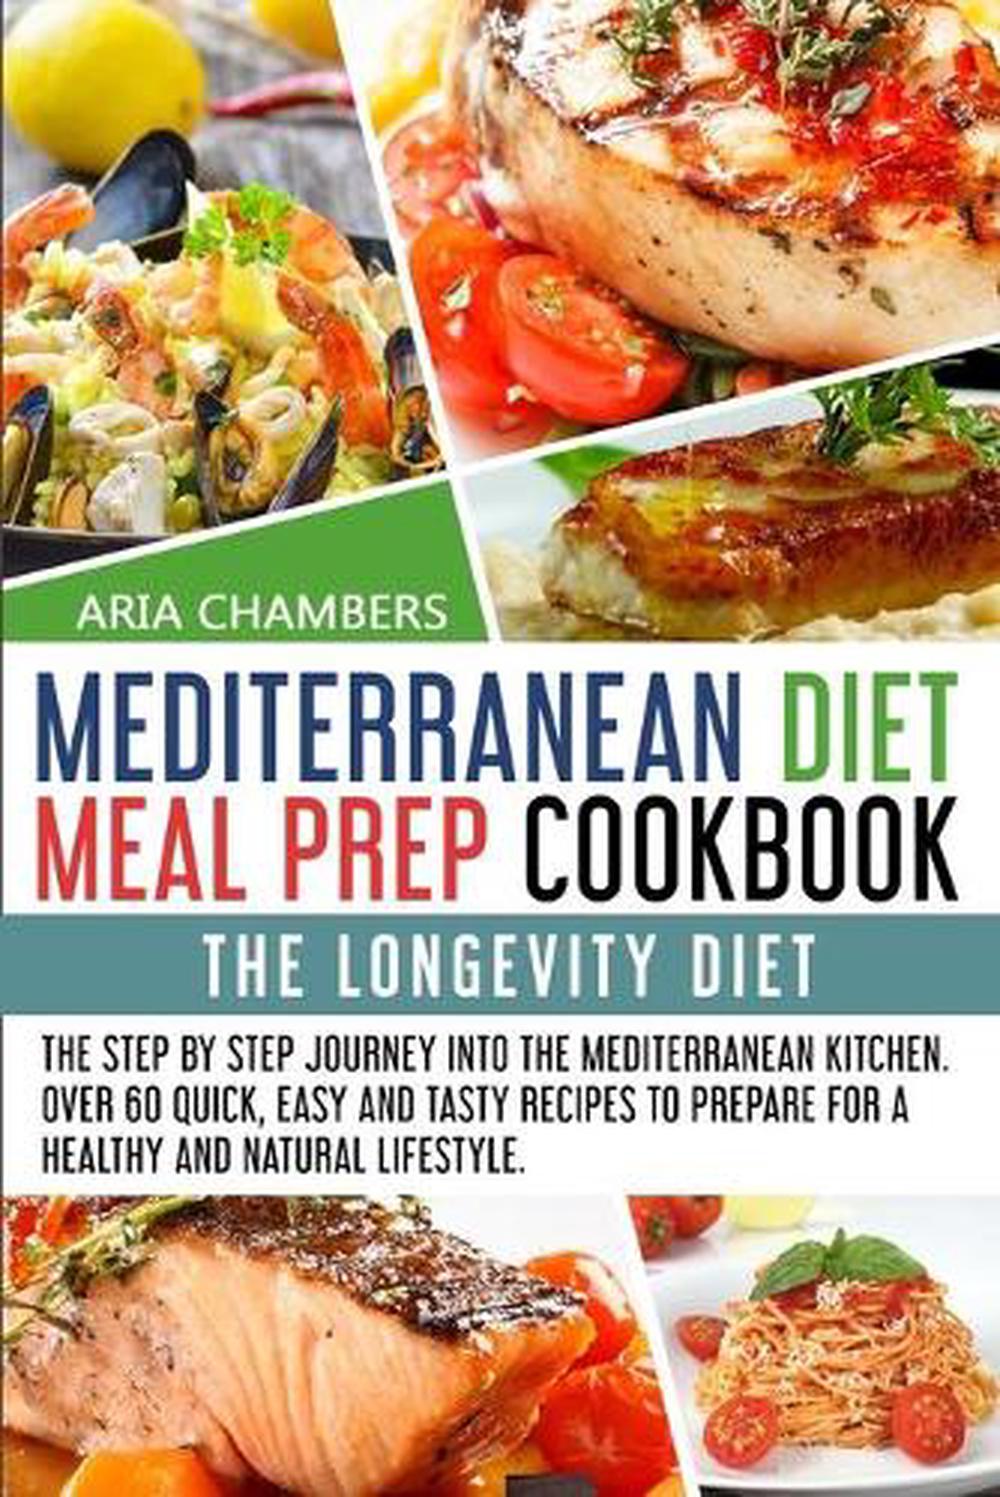 Mediterranean Diet Meal Prep Cookbook by Aria Chambers Free Shipping ...